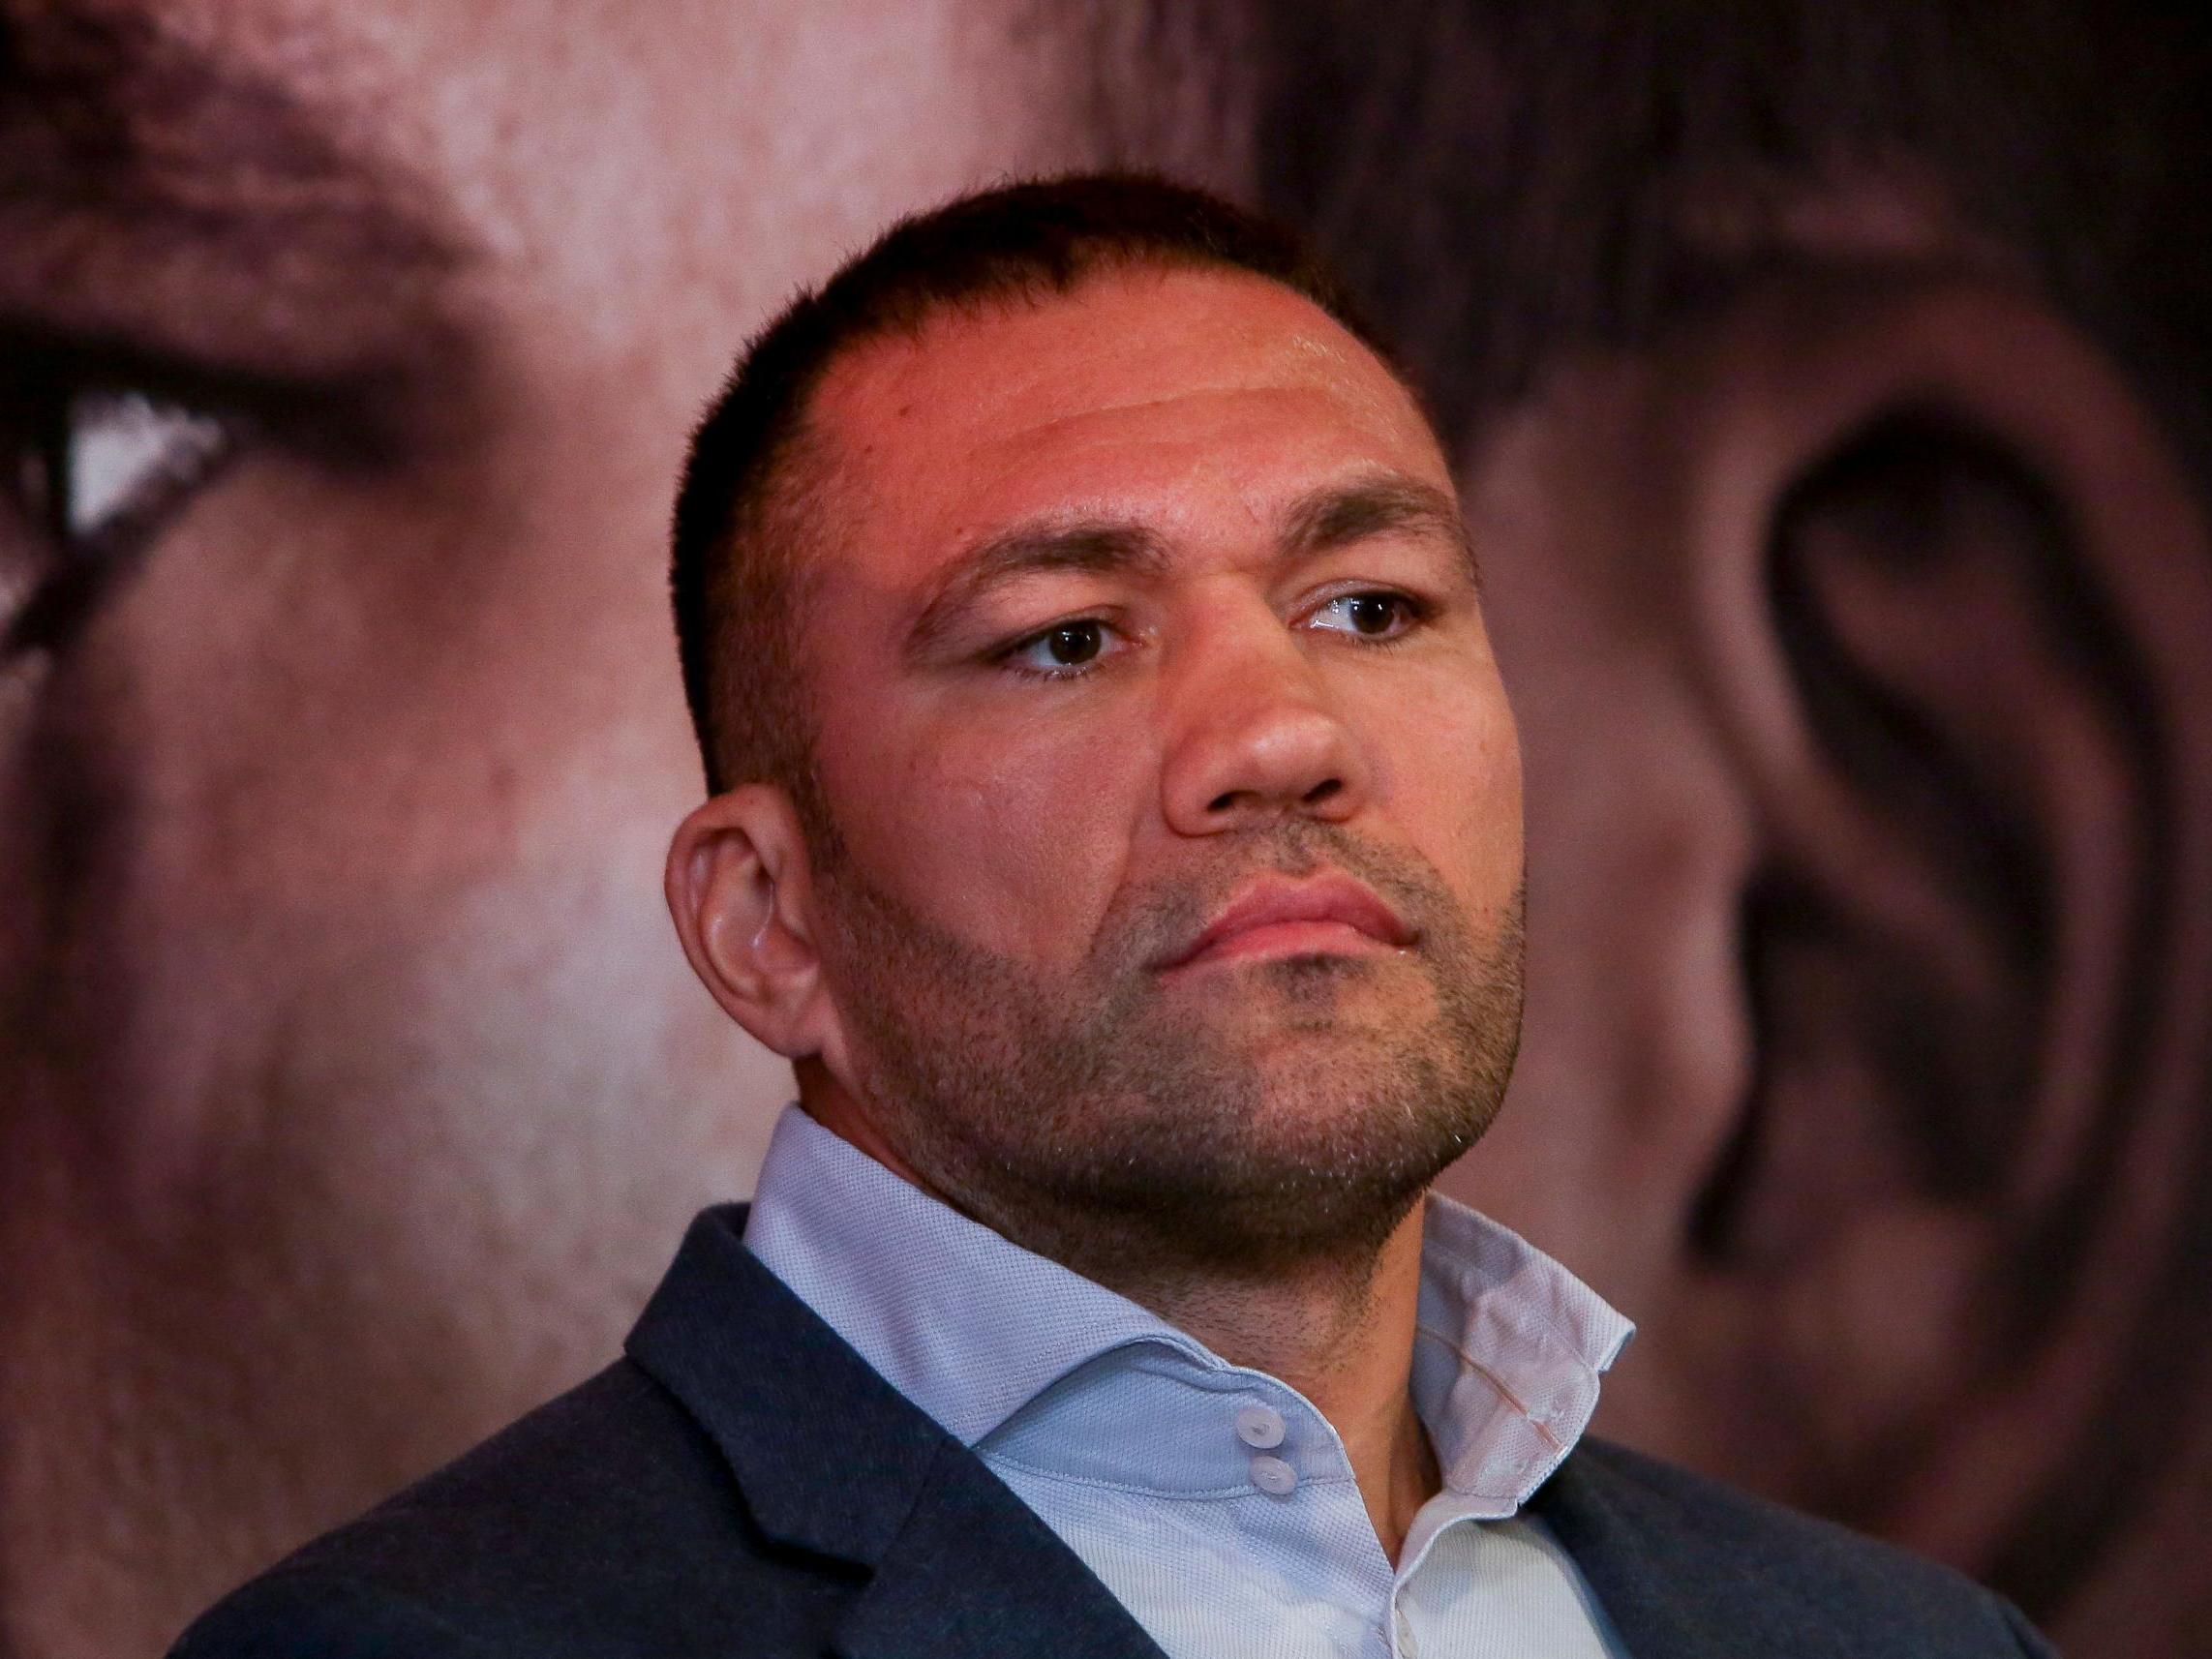 Kubrat Pulev is approaching the twilight of his high-level career